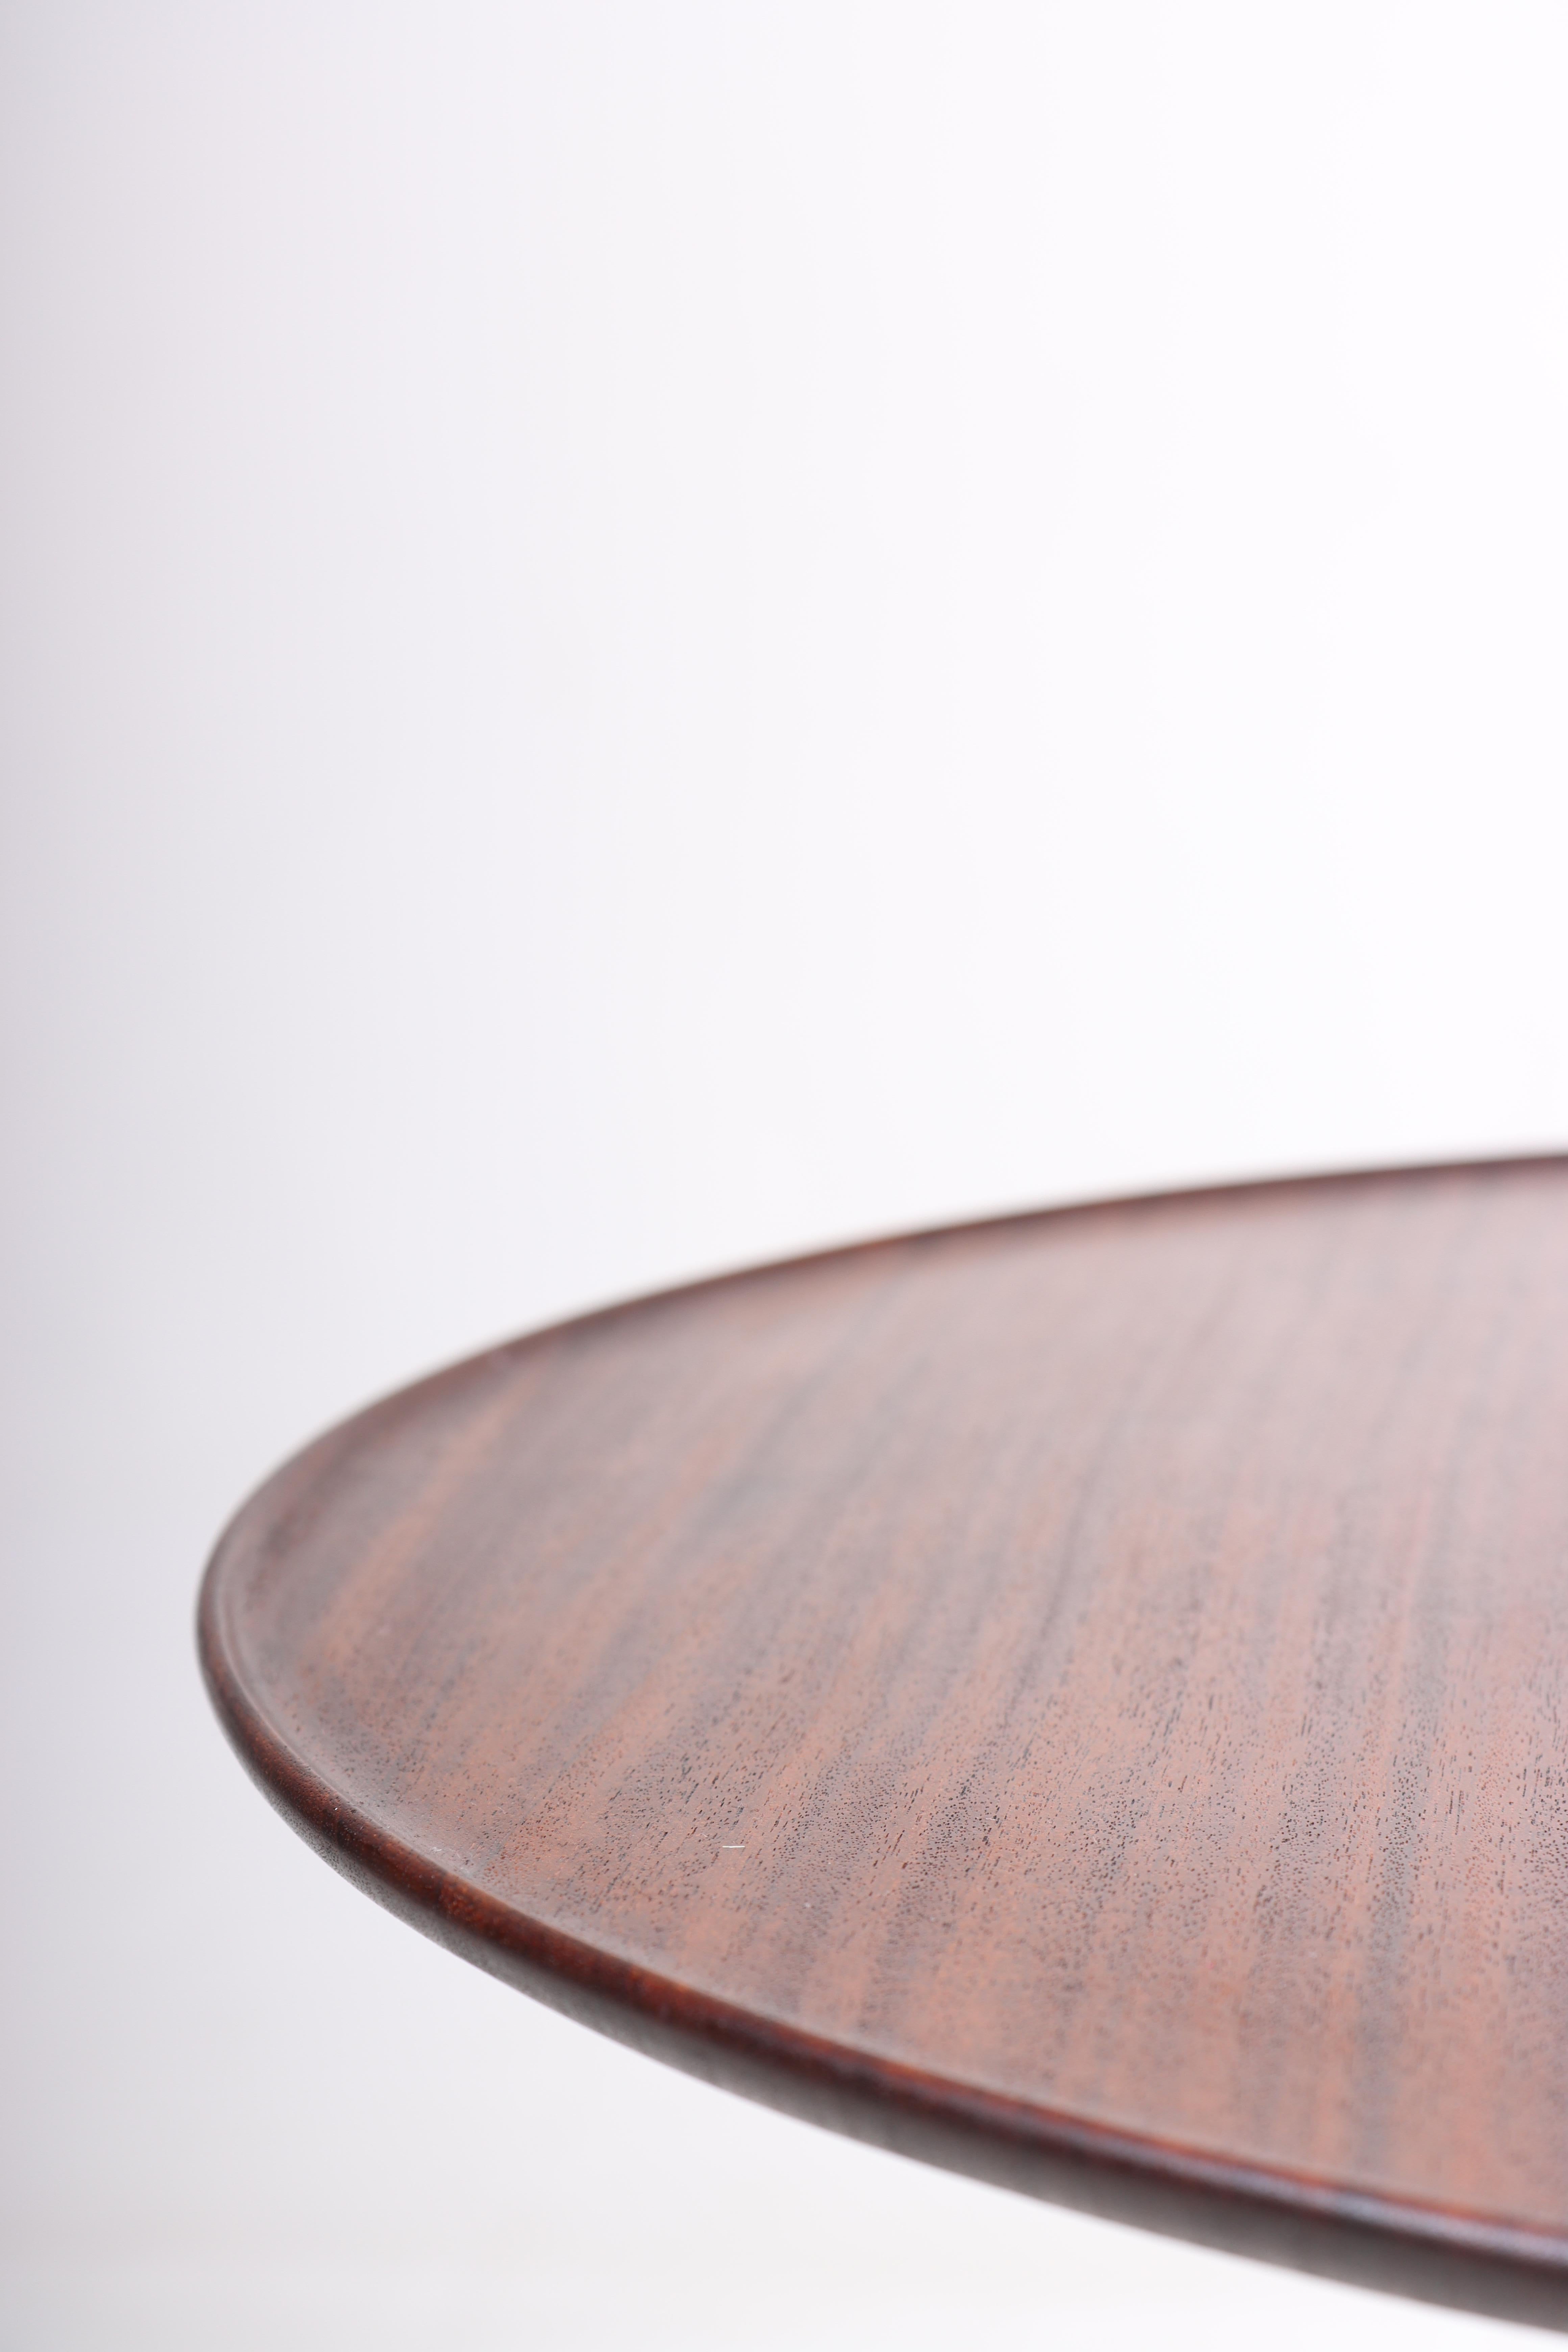 Mid-20th Century Midcentury Danish Low Table, Solid Mahogany by Cabinetmaker Frits Henningsen For Sale